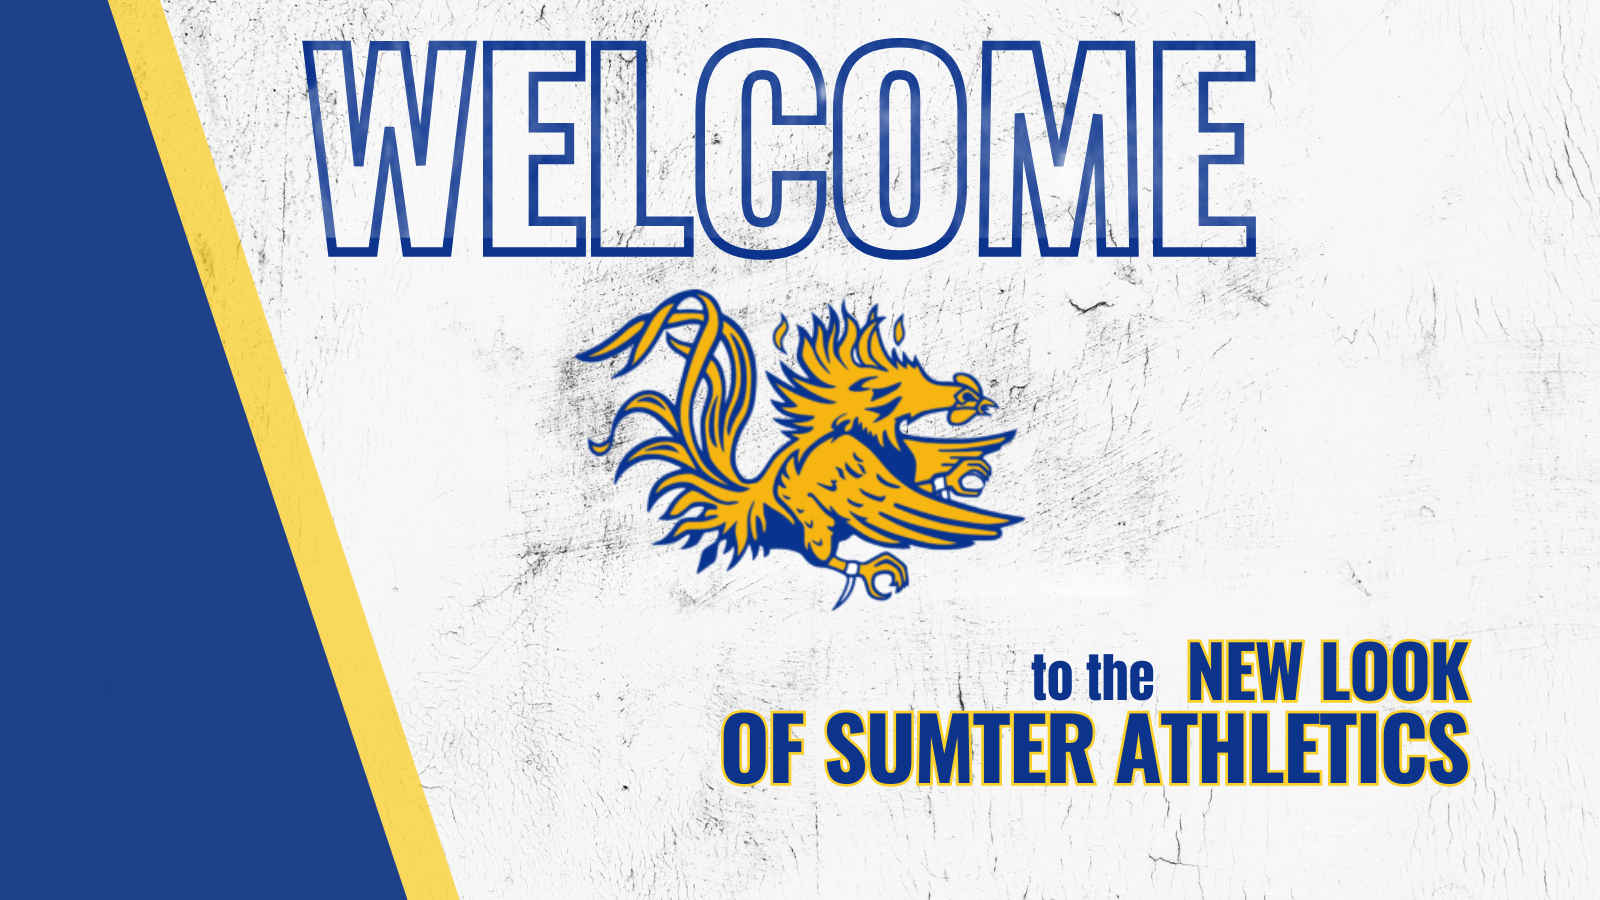 1709664692_CopyofOleyValleyWelcometo1280x320pxTwitterPost4.png - Image for 🎉 Exciting News for Sumter Athletics Fans! 🎉